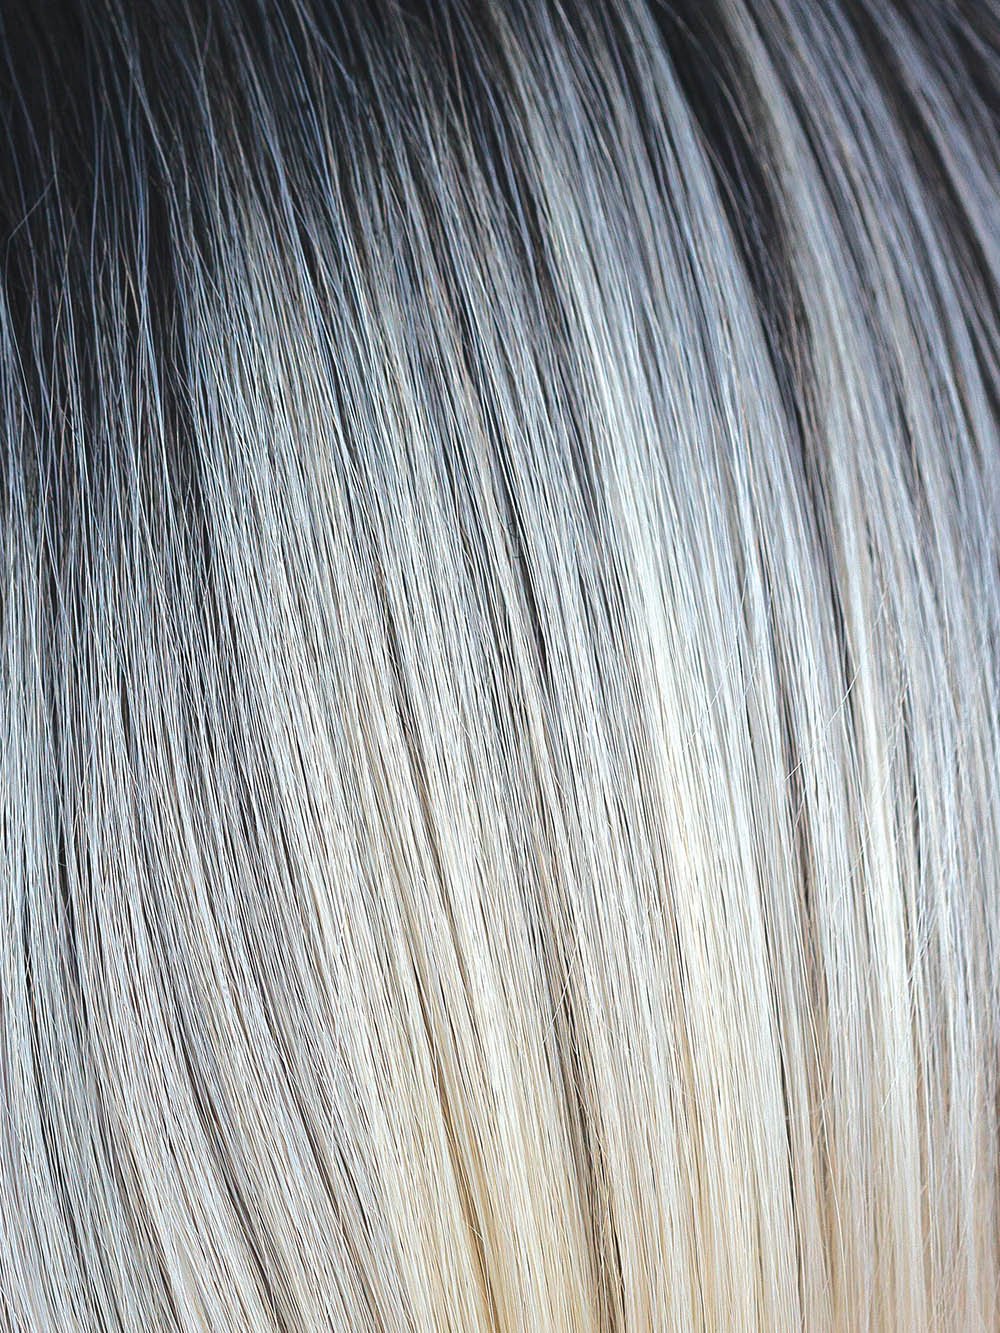 CREME DE COCO | Light Copper Blonde in the Middle and Medium Brown Nape & Roots